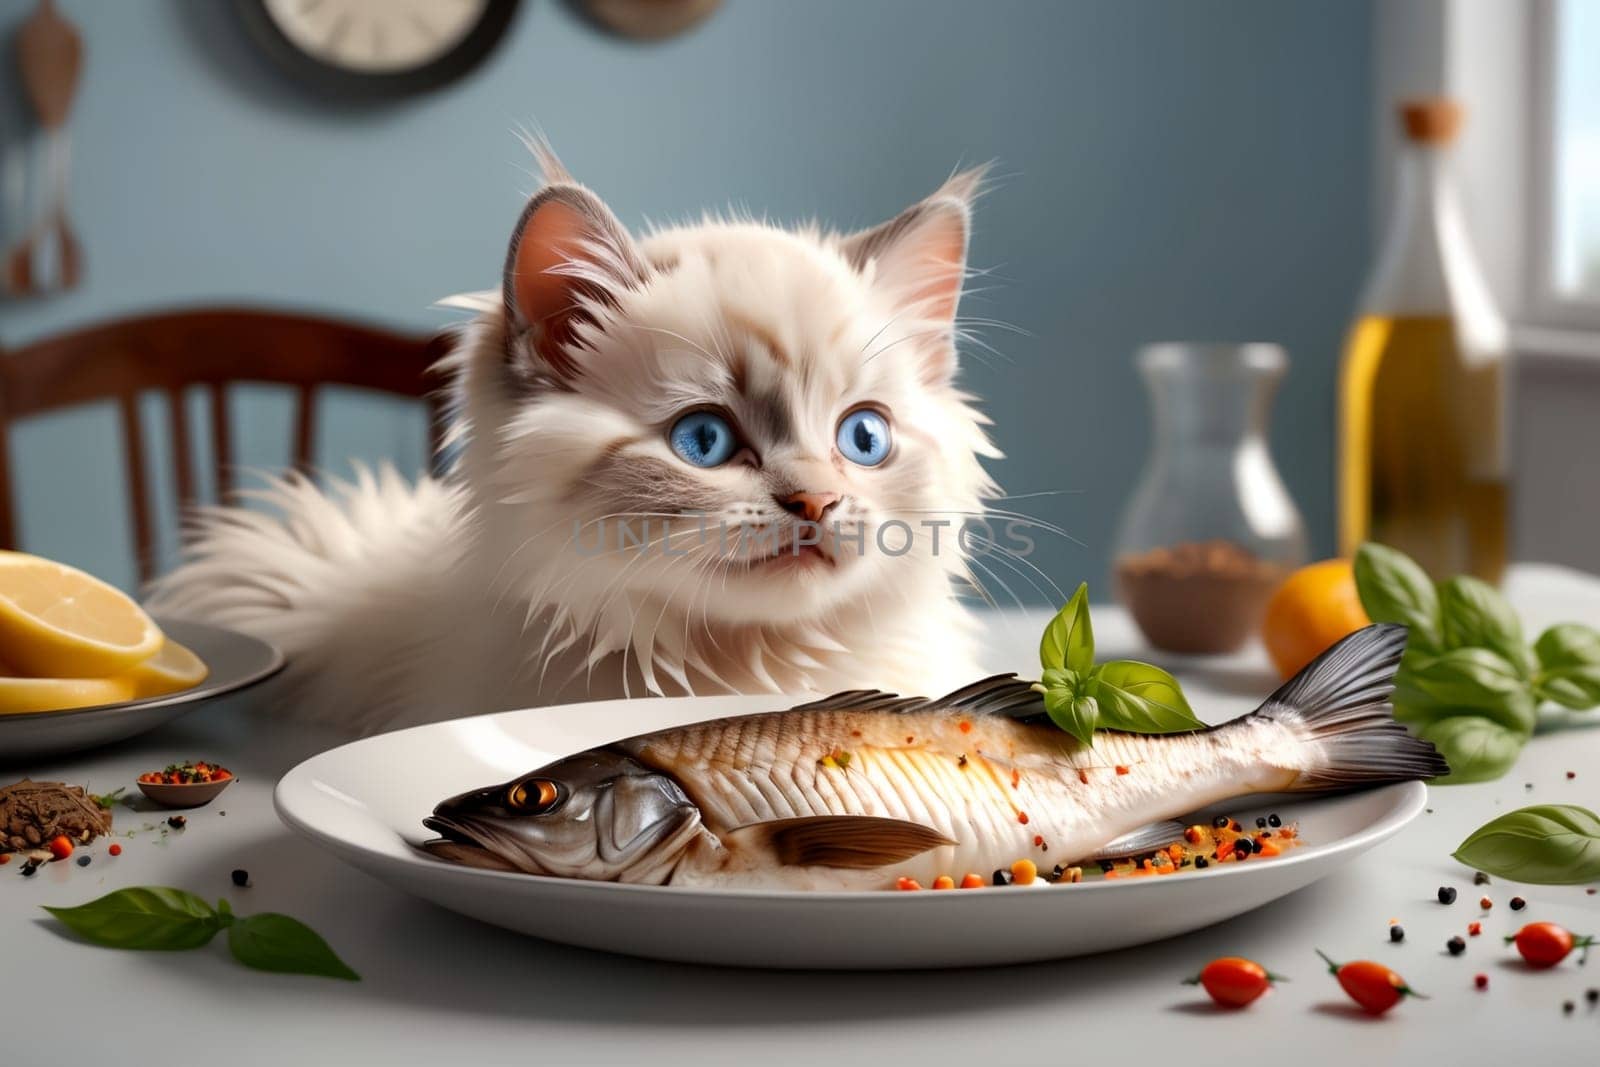 cute Ragdoll kitten looking at fried fish in a plate, isolated on a white background by Rawlik